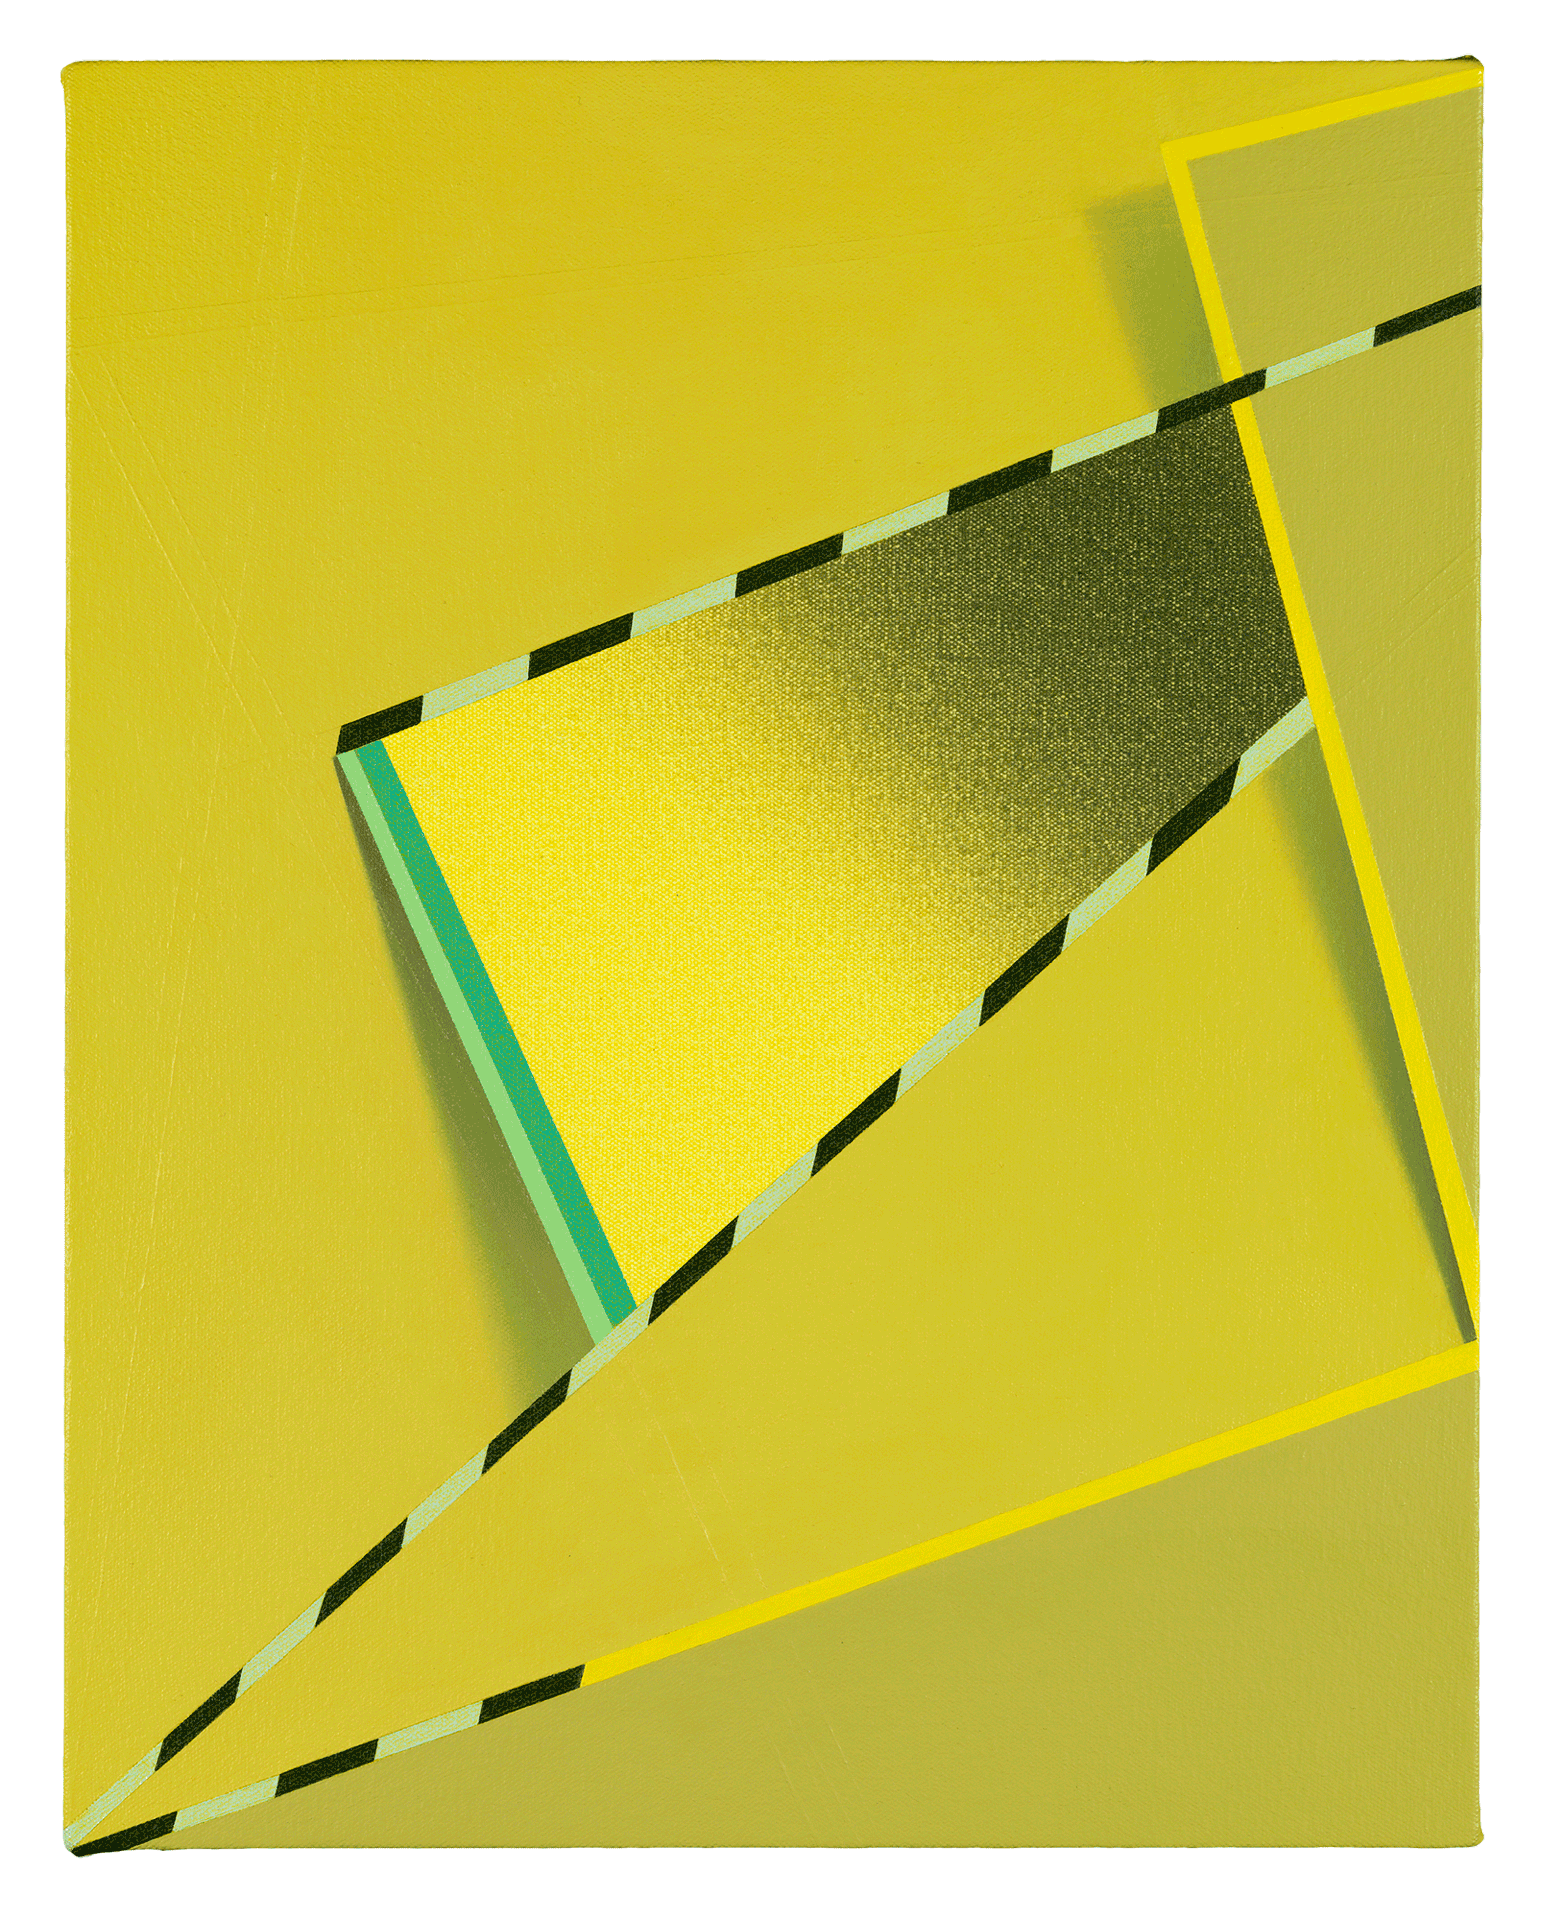 A painting by Tomma Abts, titled Feke, dated 2013.